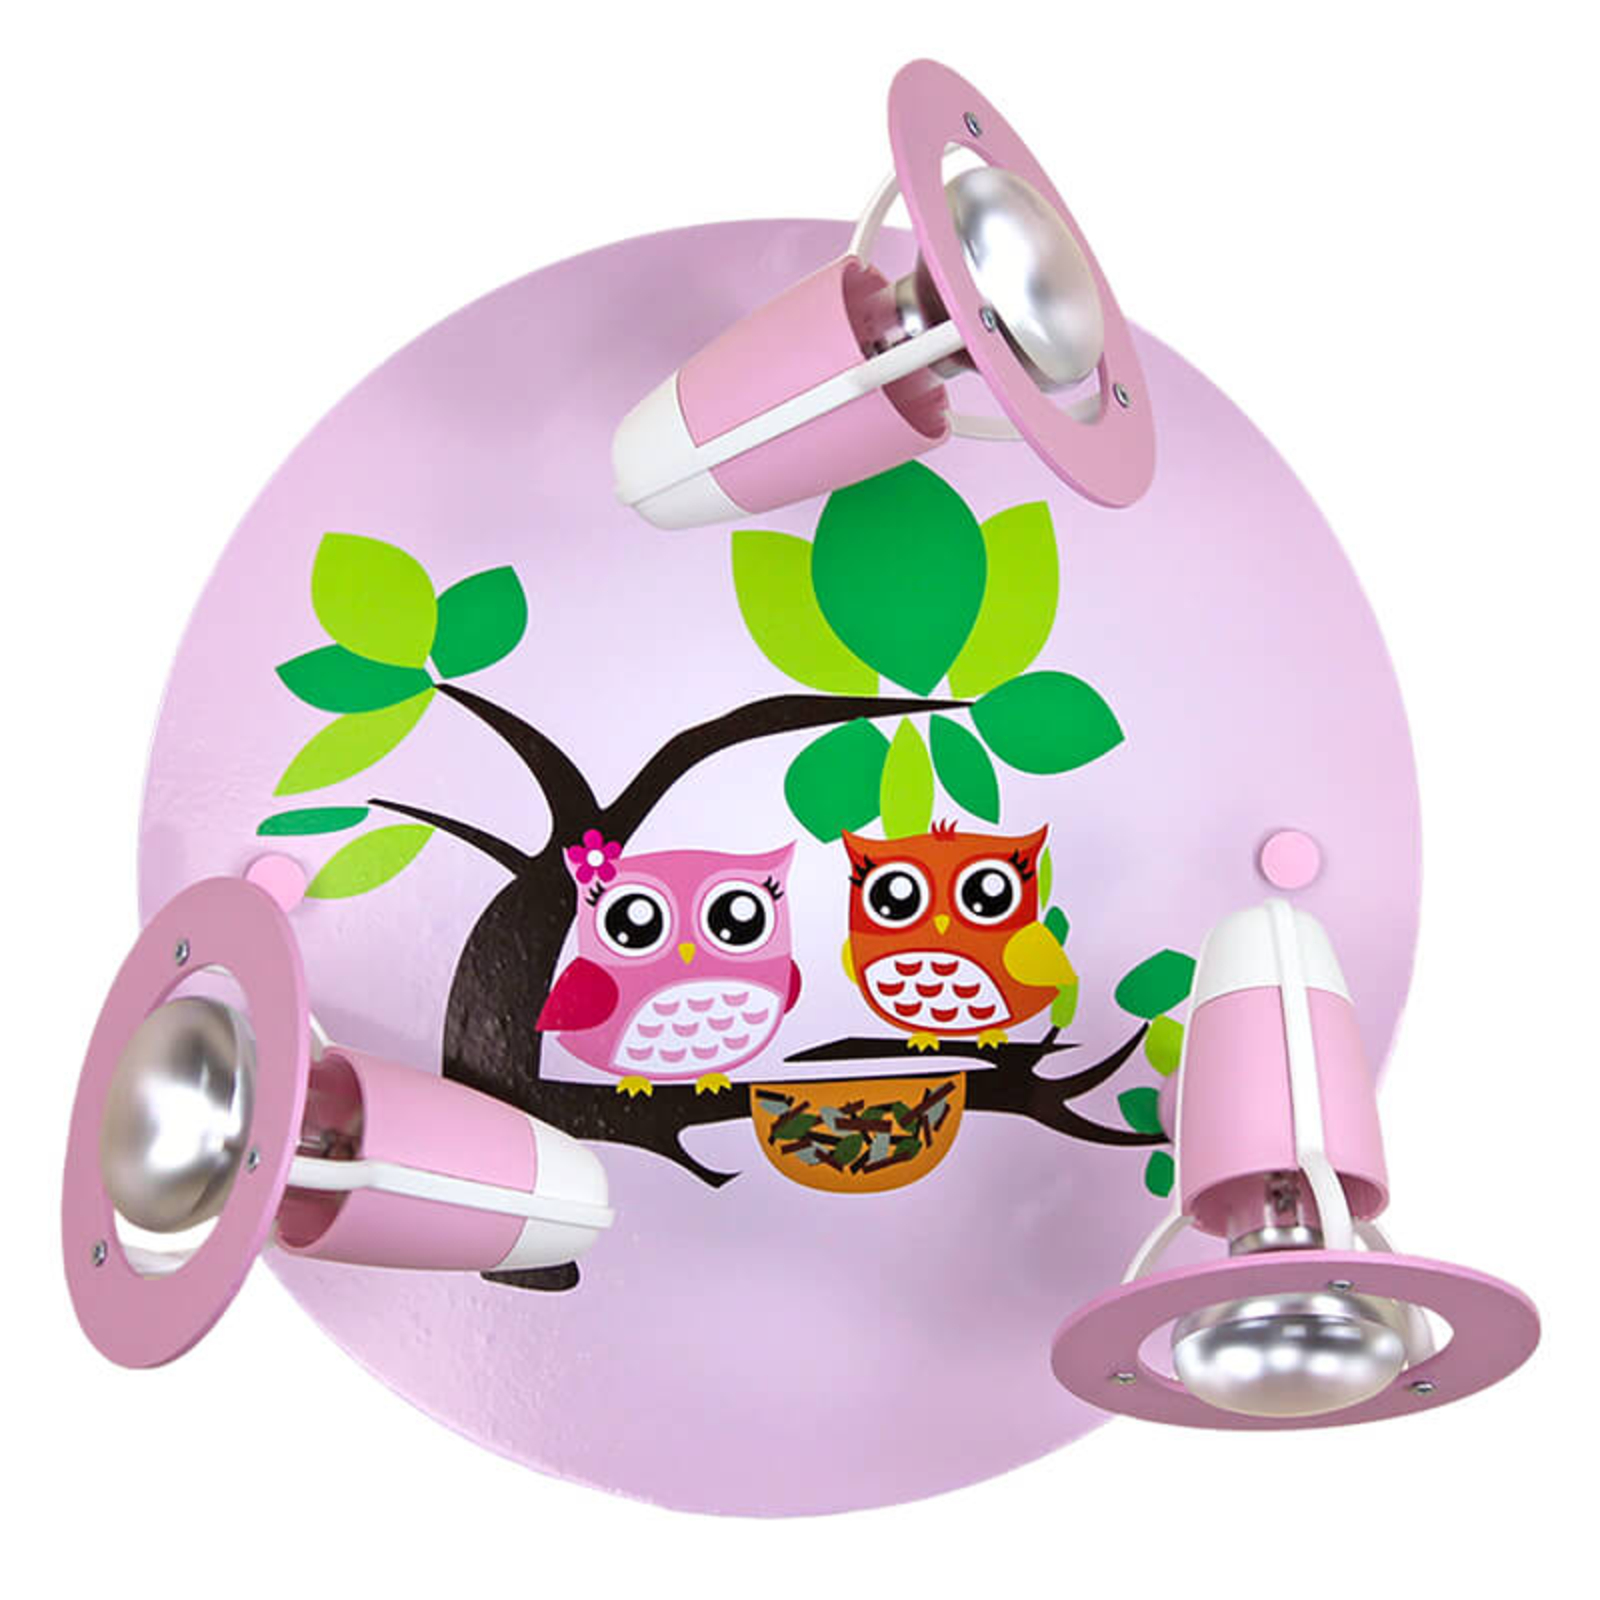 Owl ceiling light for a child’s room, pink